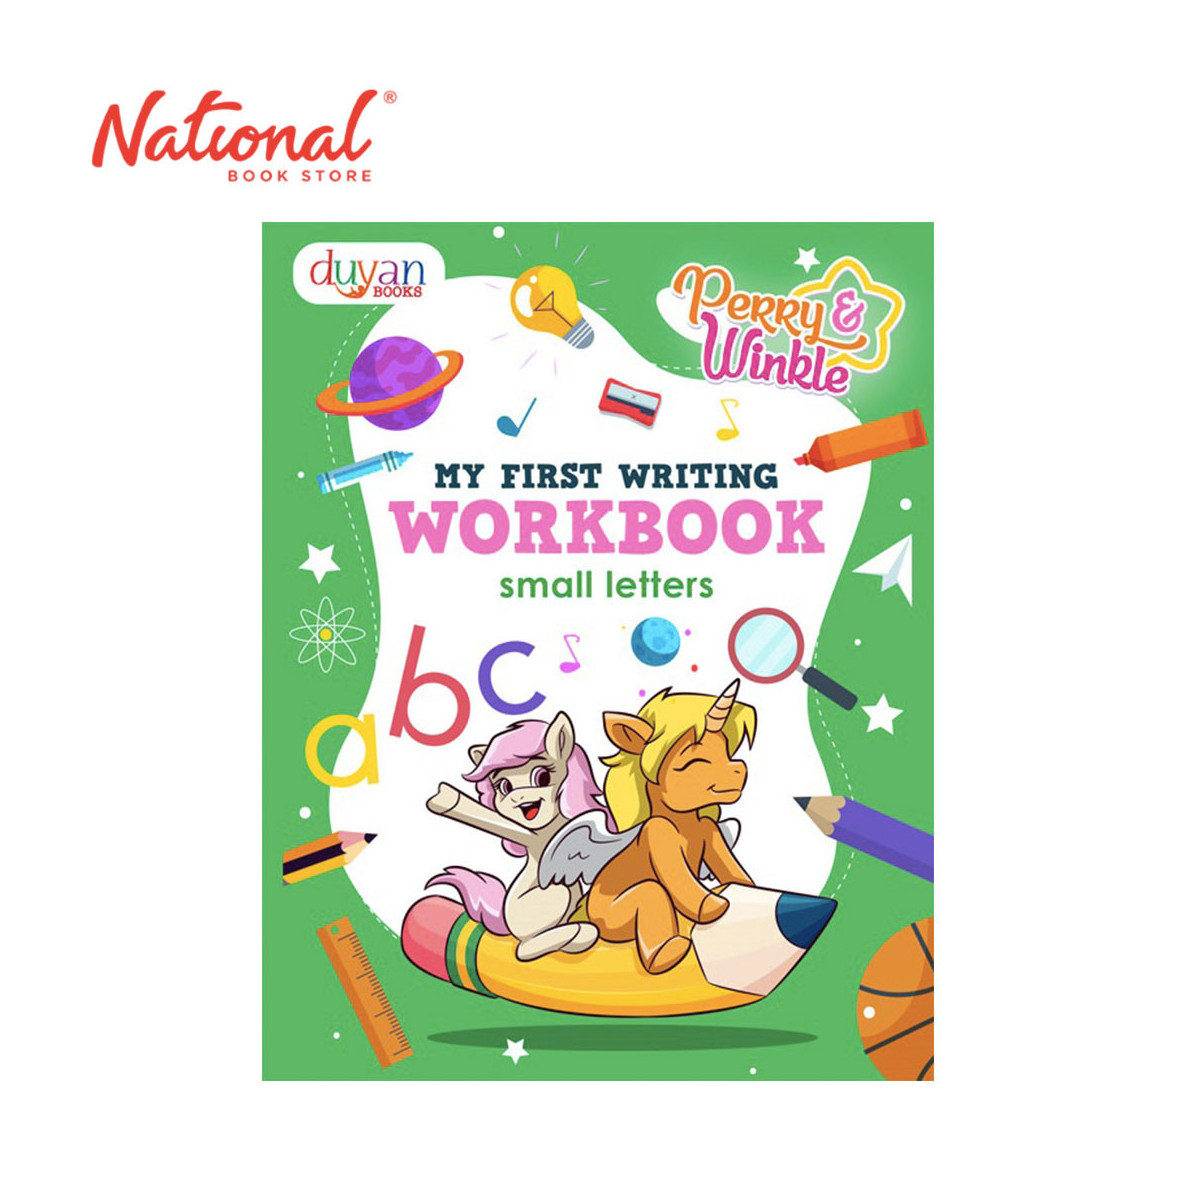 My First Writing Workbook: Small - Trade Paperback - Activity Books for Kids